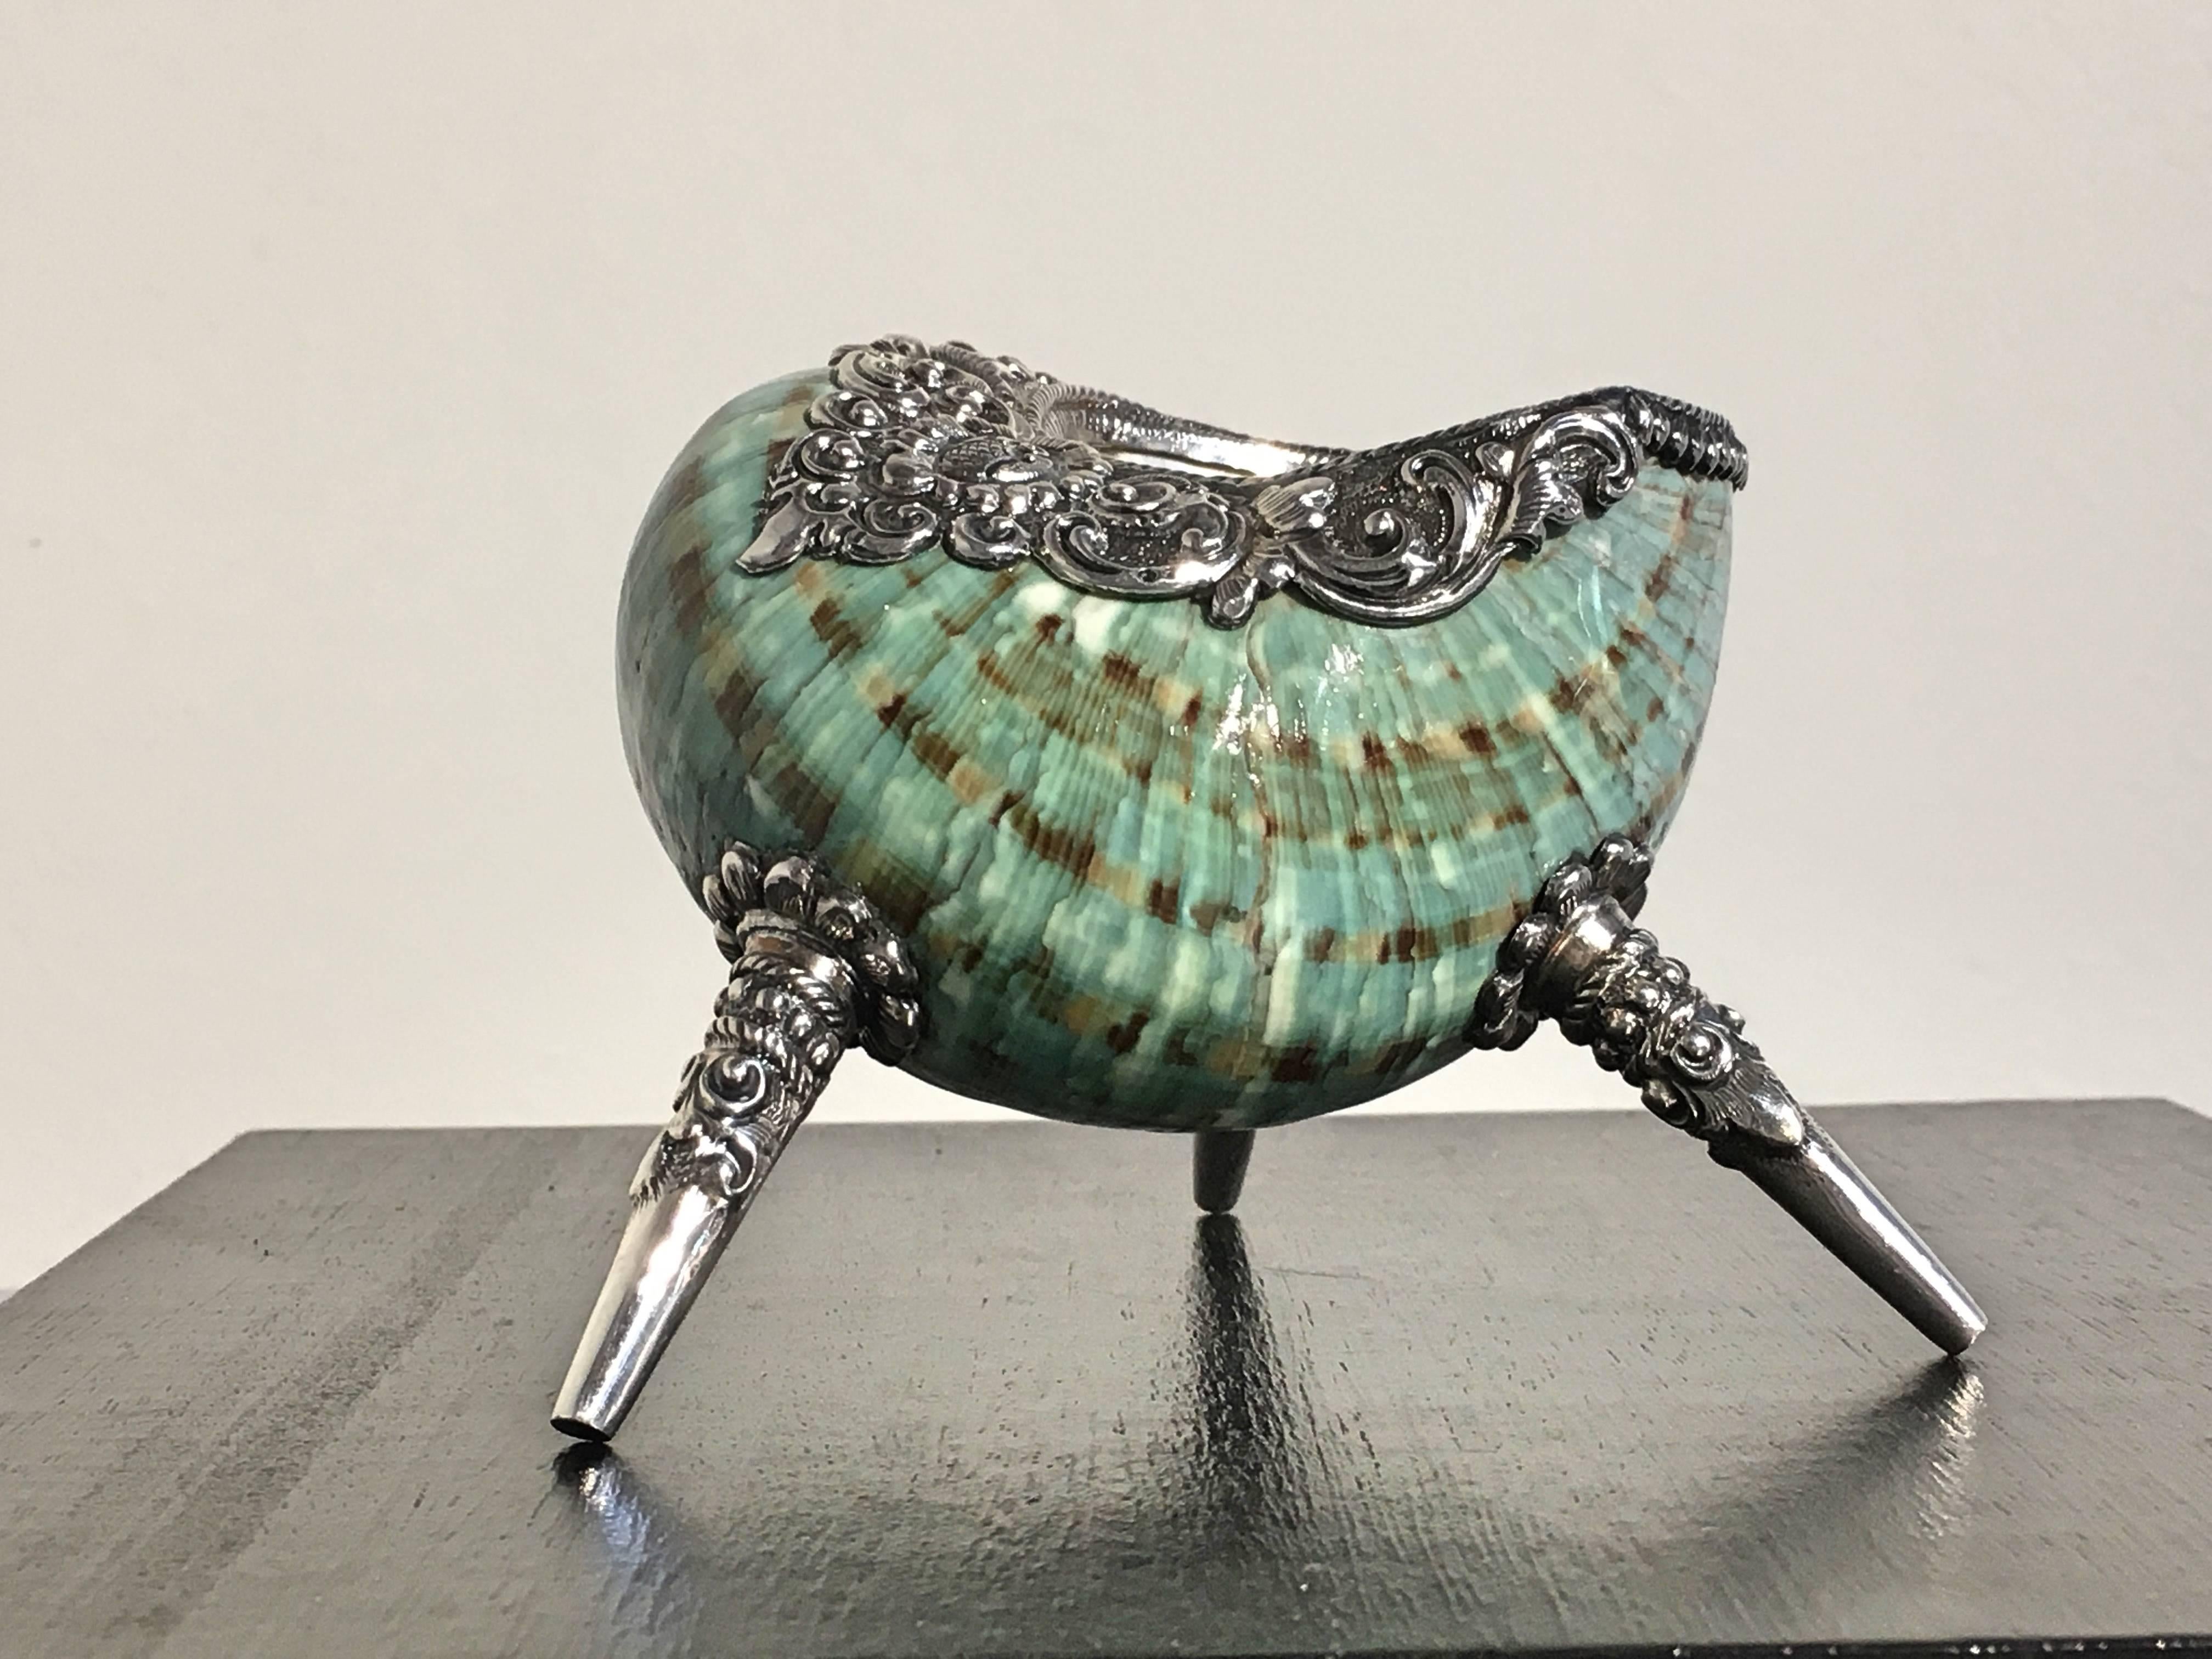 A truly elegant objet de vertu comprised of a large green turbo snail shell mounted in sterling silver, resting to three sterling silver legs. 
The shell of a vibrant sea foam green, with beautiful brown striations throughout. The heavy sterling